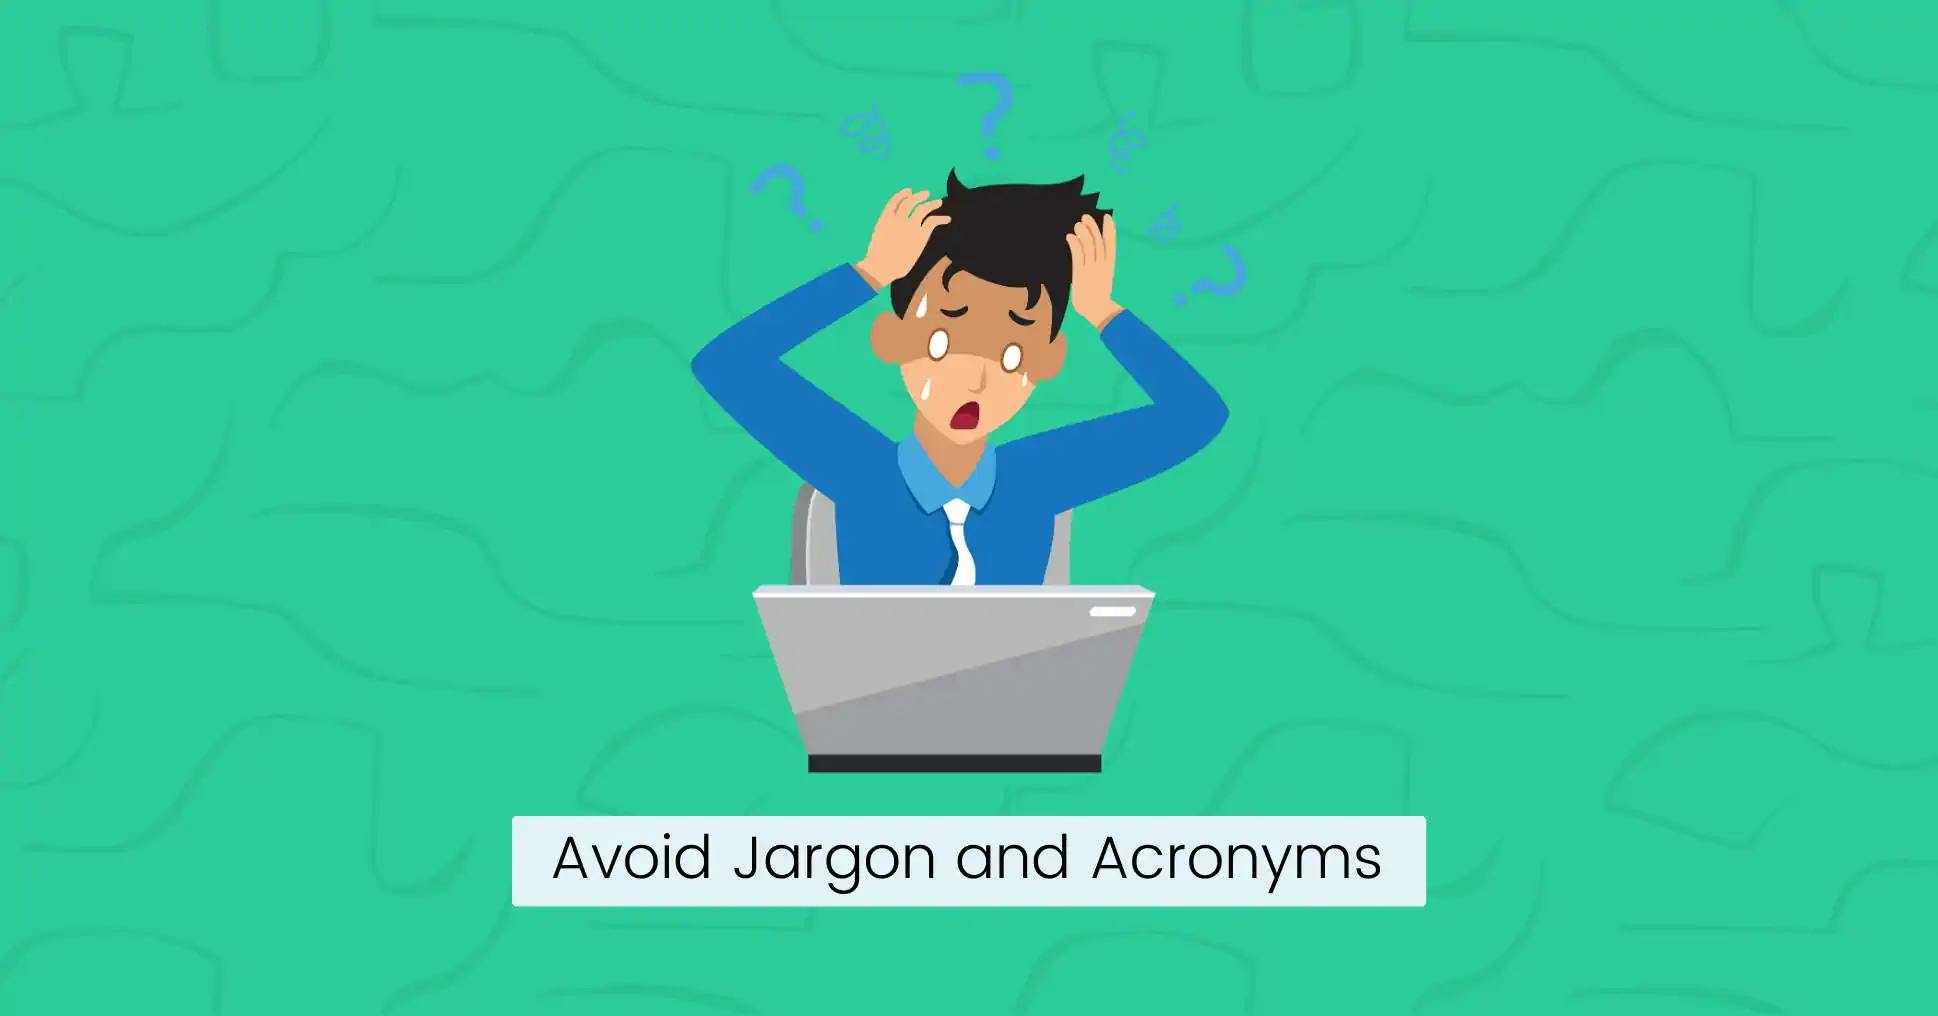 Avoid jargon and acronyms